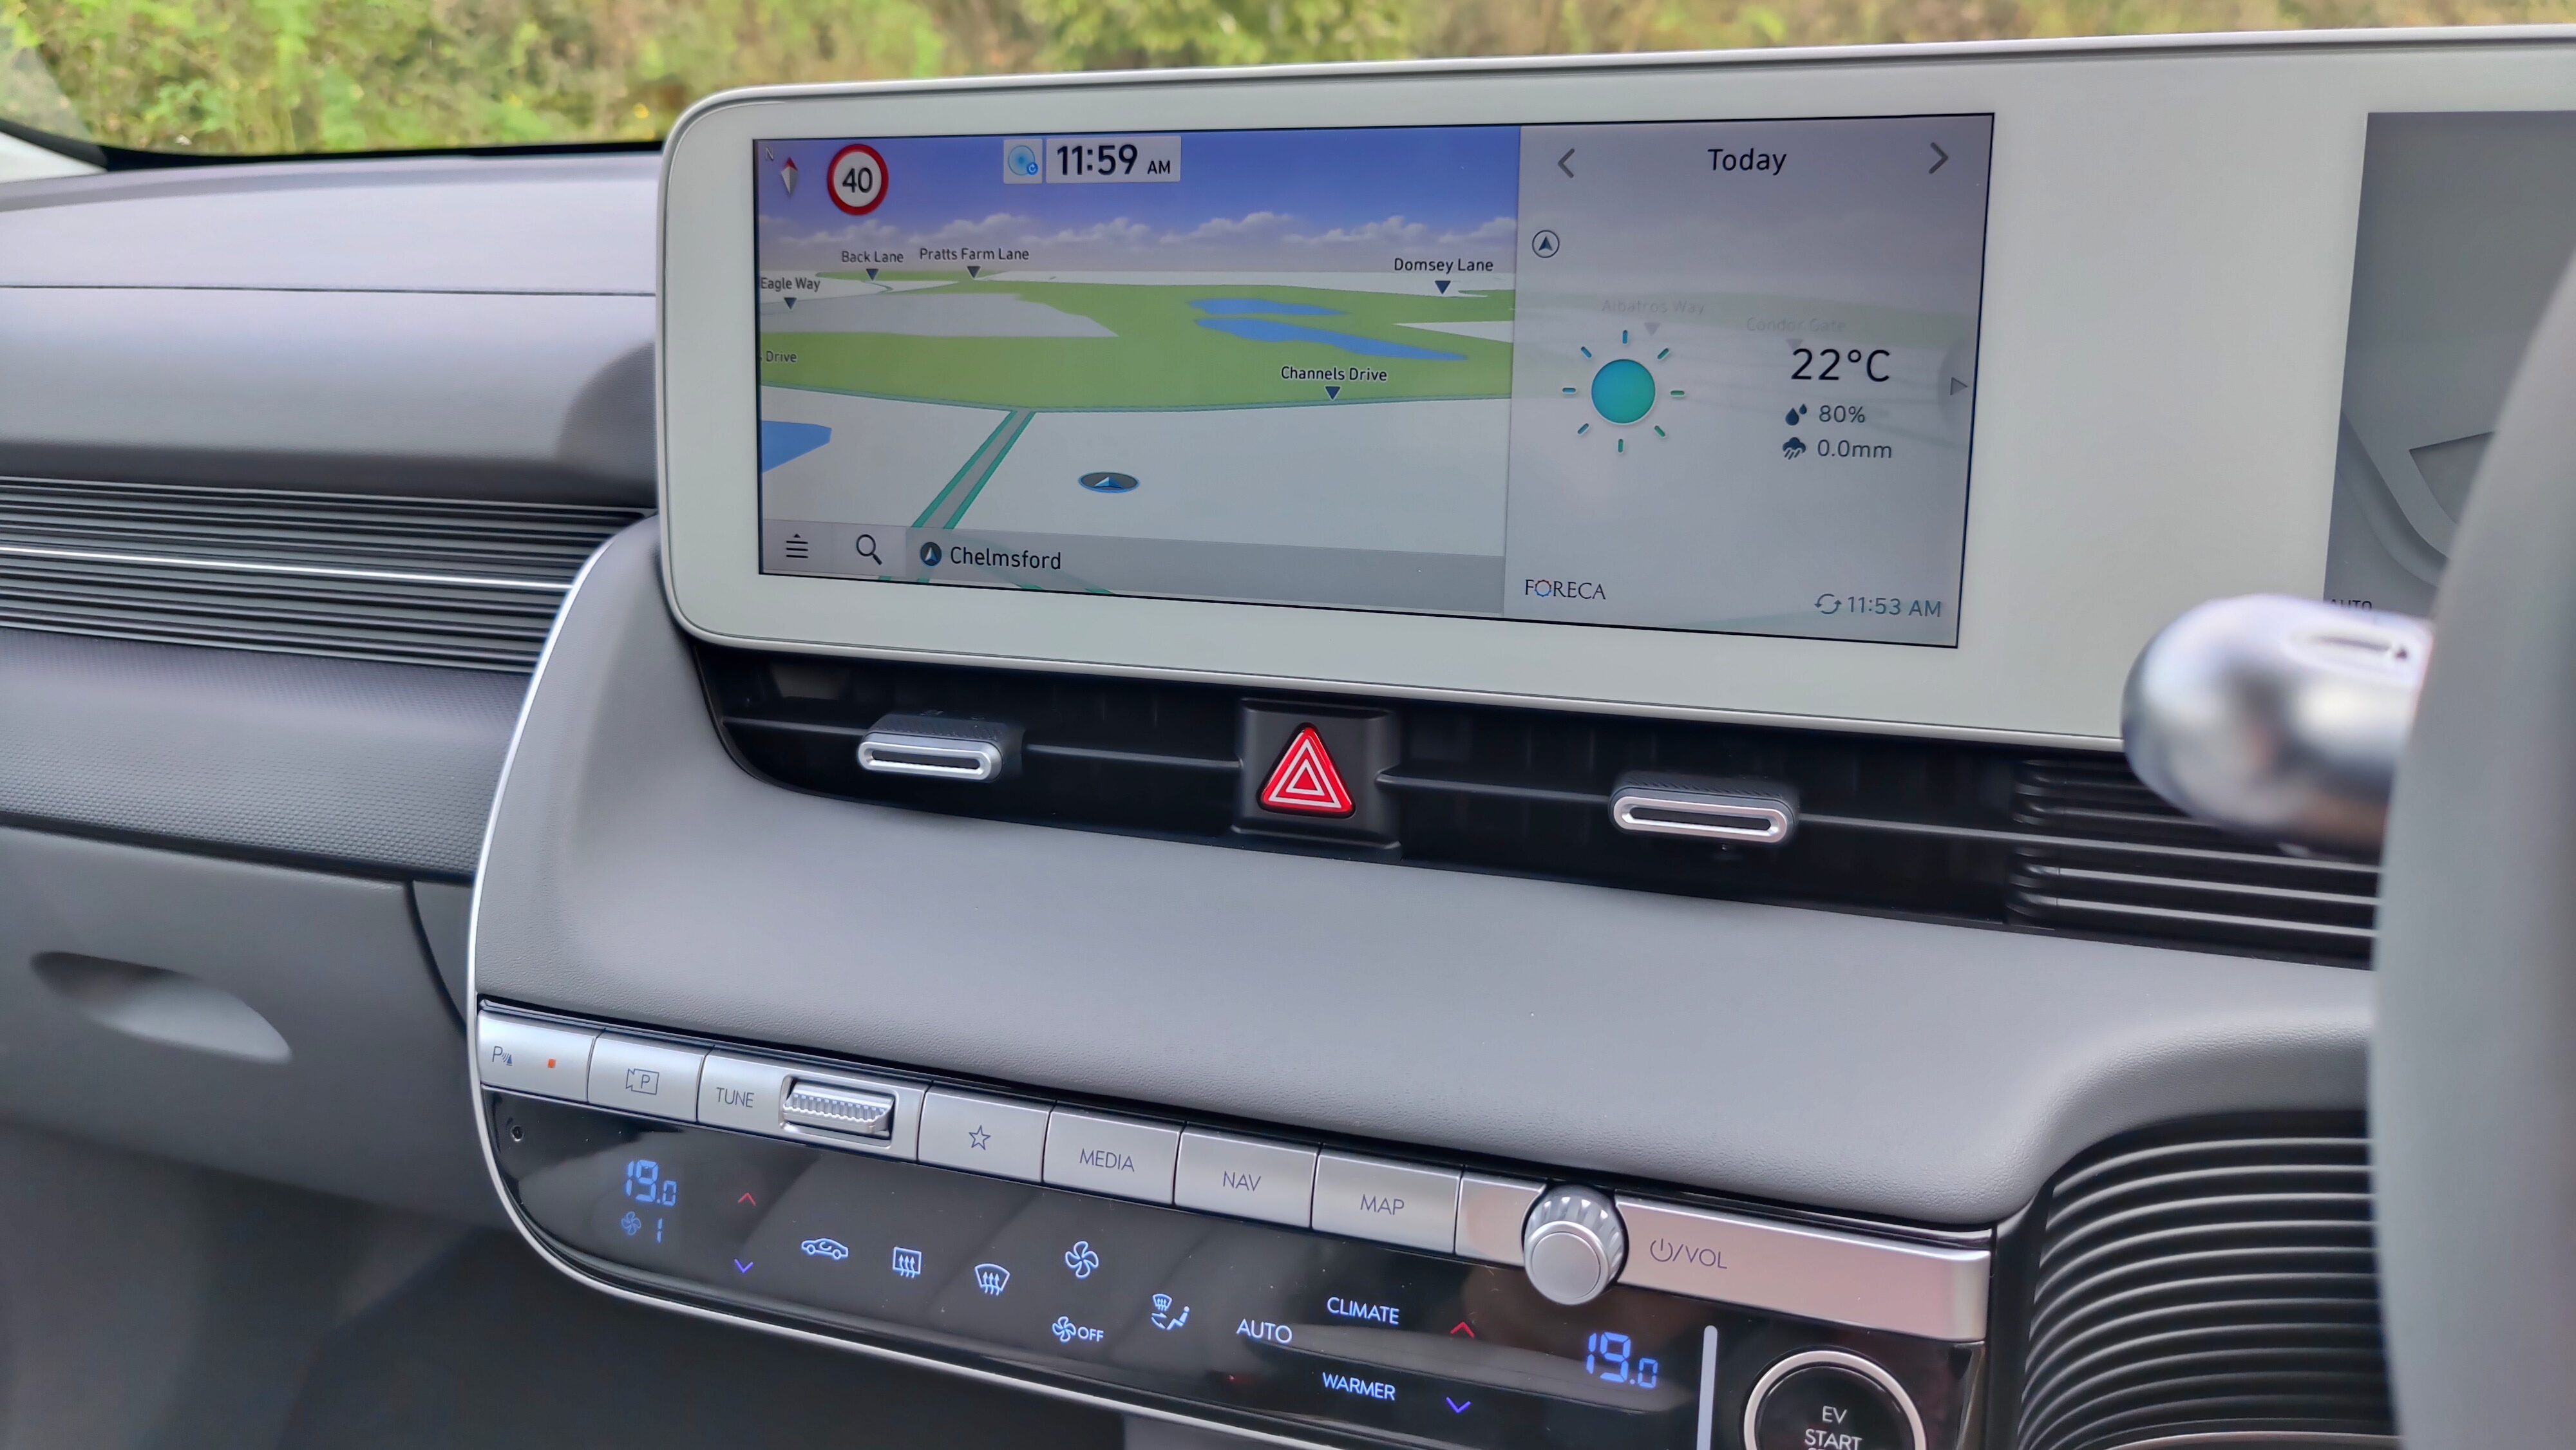 The central display in the Ioniq 5 showing a map